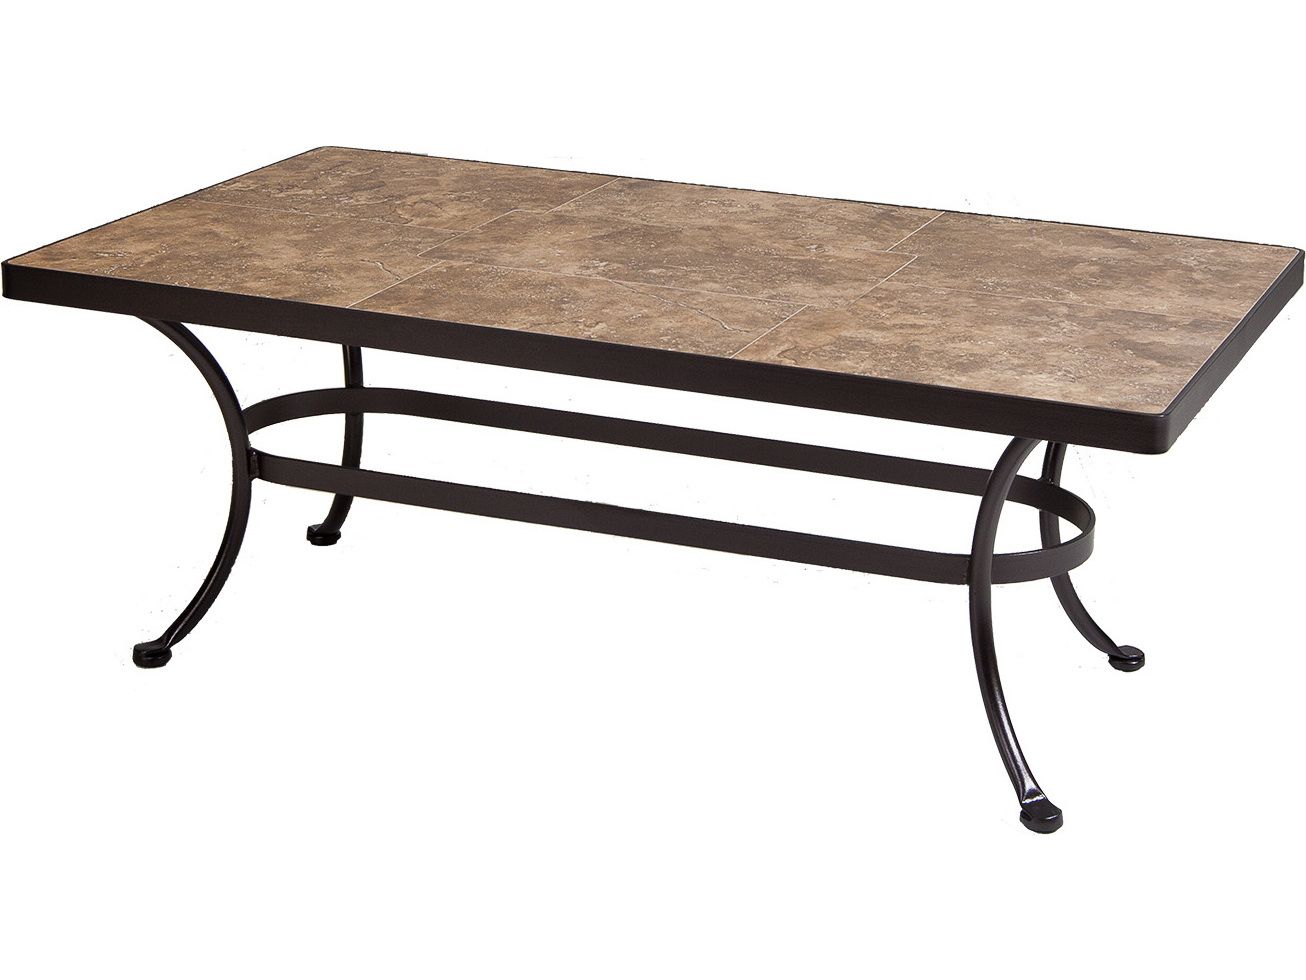 Ow Lee Wrought Iron Rectangular Coffee Table Base 43w X 20''d X  (View 7 of 20)